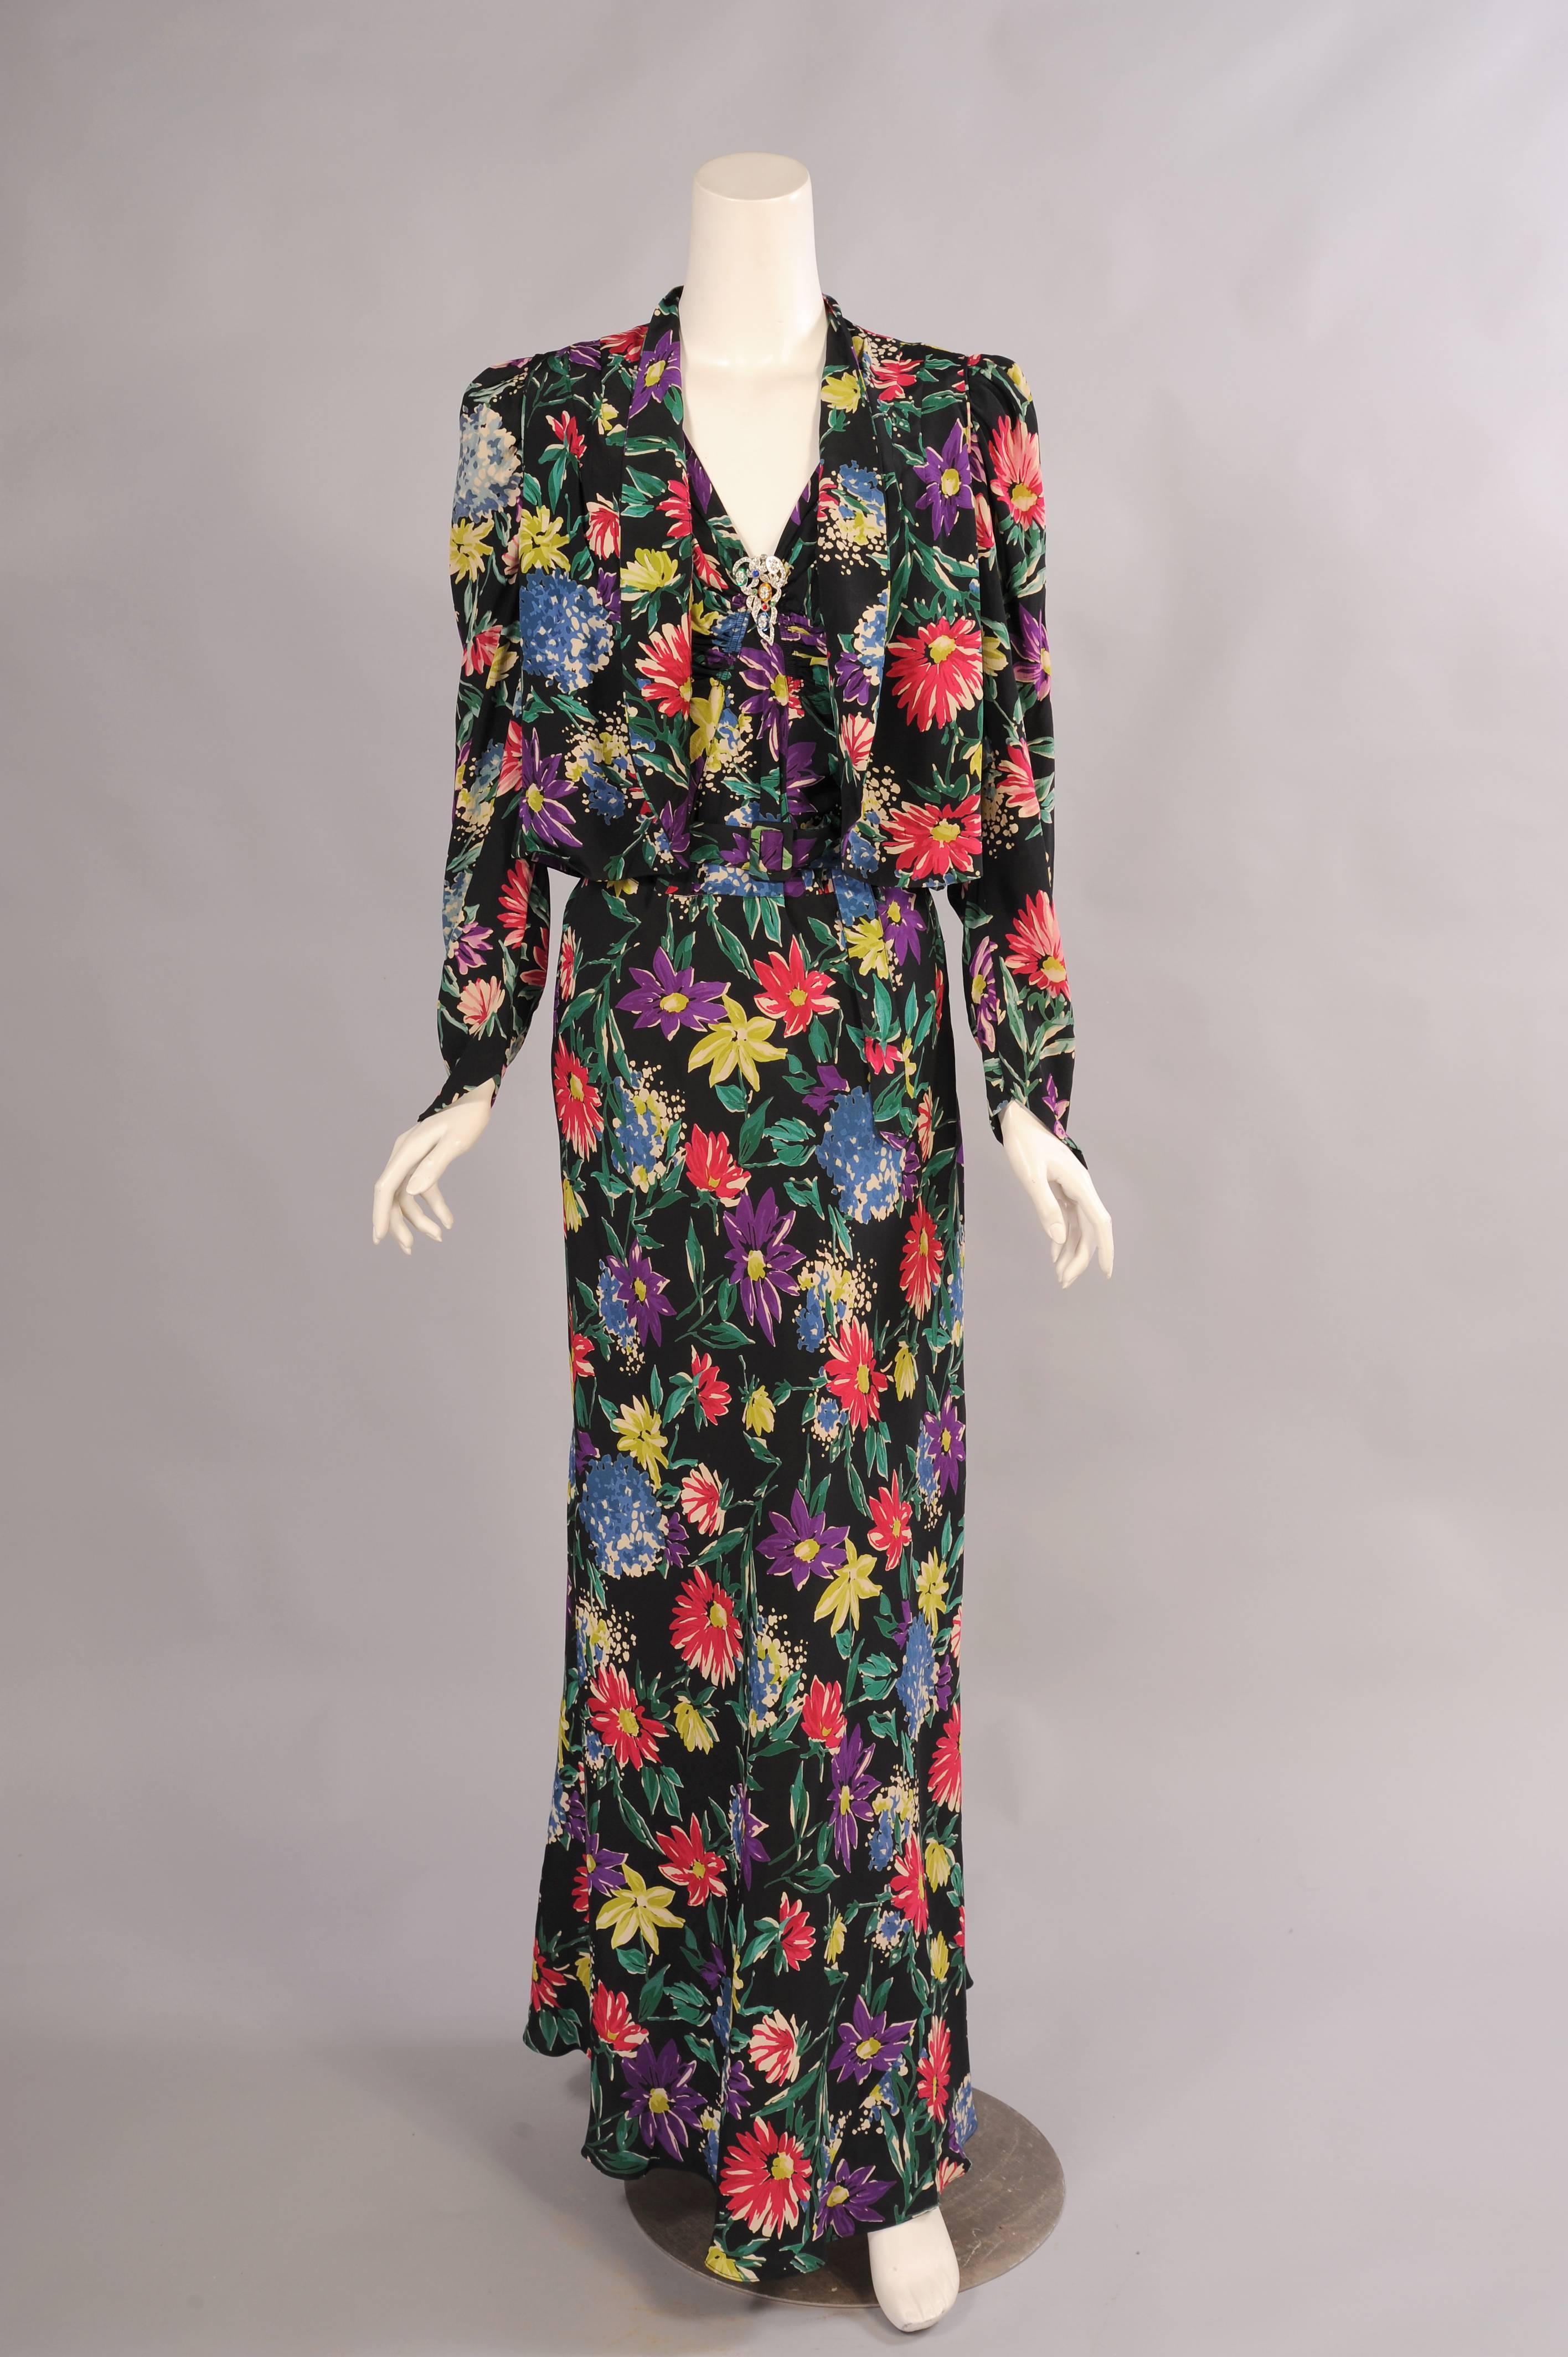 A gorgeous and colorful floral print is set against a classic black background for this late 1930's evening dress. With the addition of the jacket it can be worn in several ways. For a more covered up look the jacket can be pulled closed to create